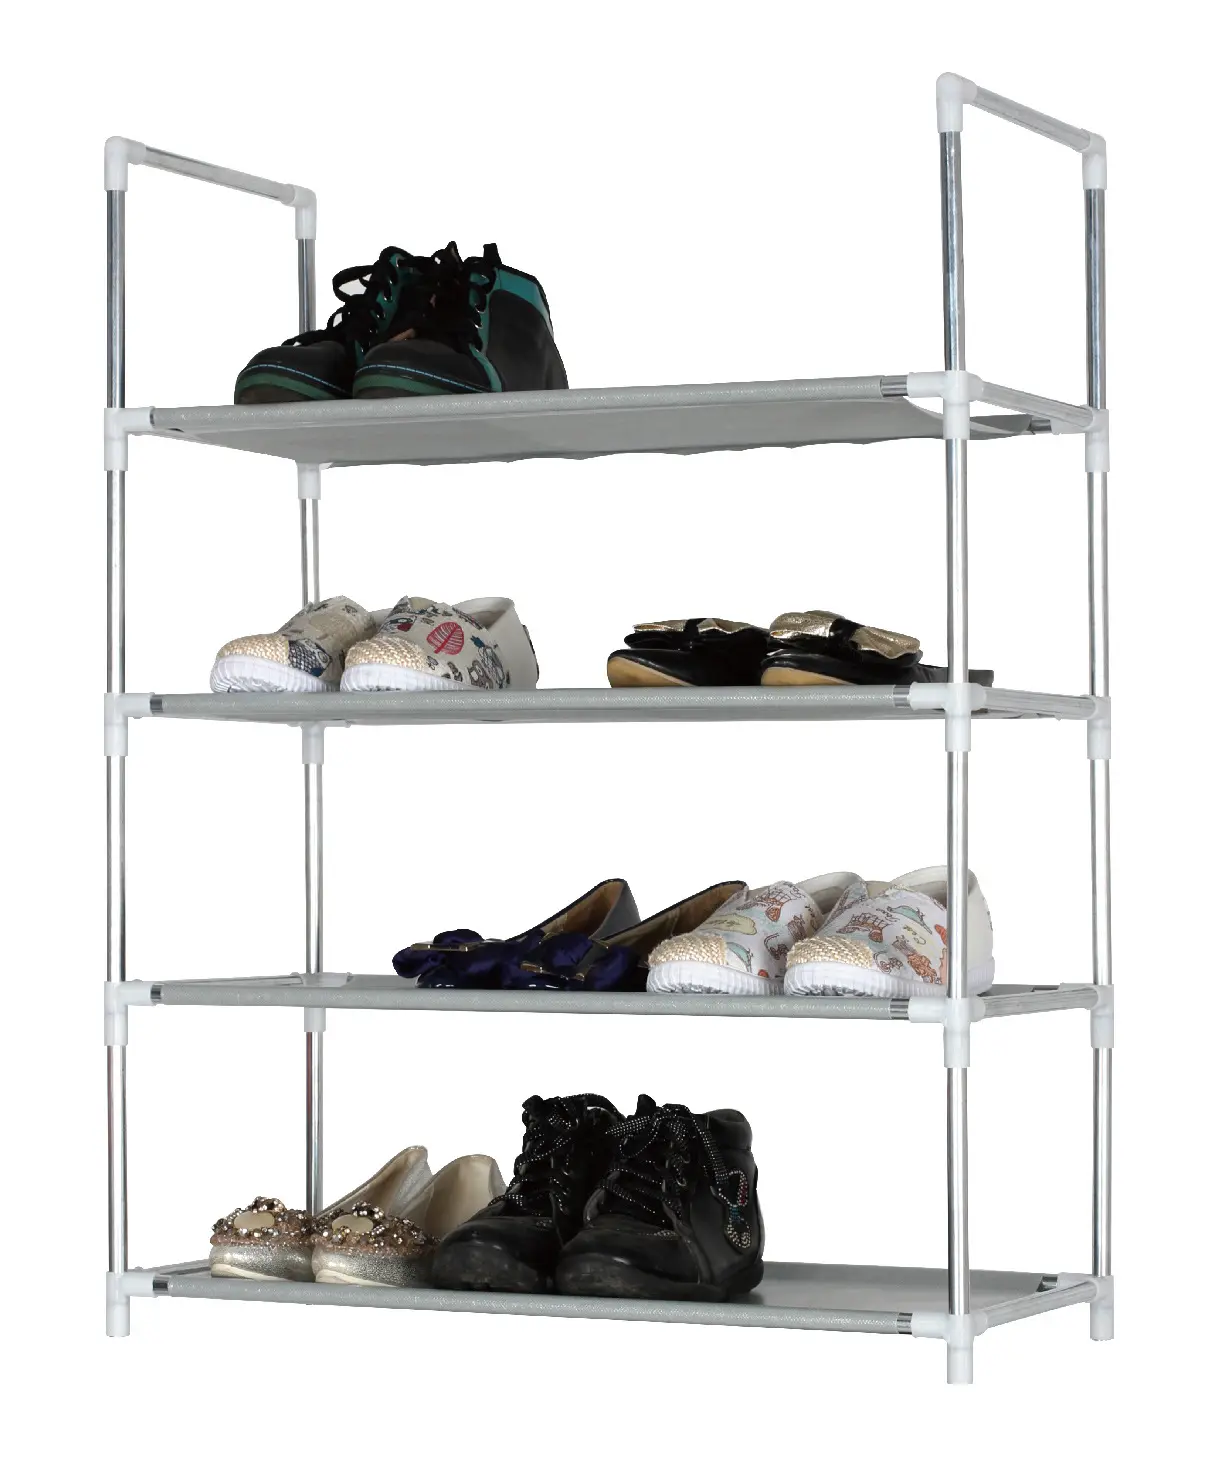 Amazon Hot Selling Simple Metal Shoe Rack, Assembly Fabric Economy Small Shoe Rack for Bedroom Dorm